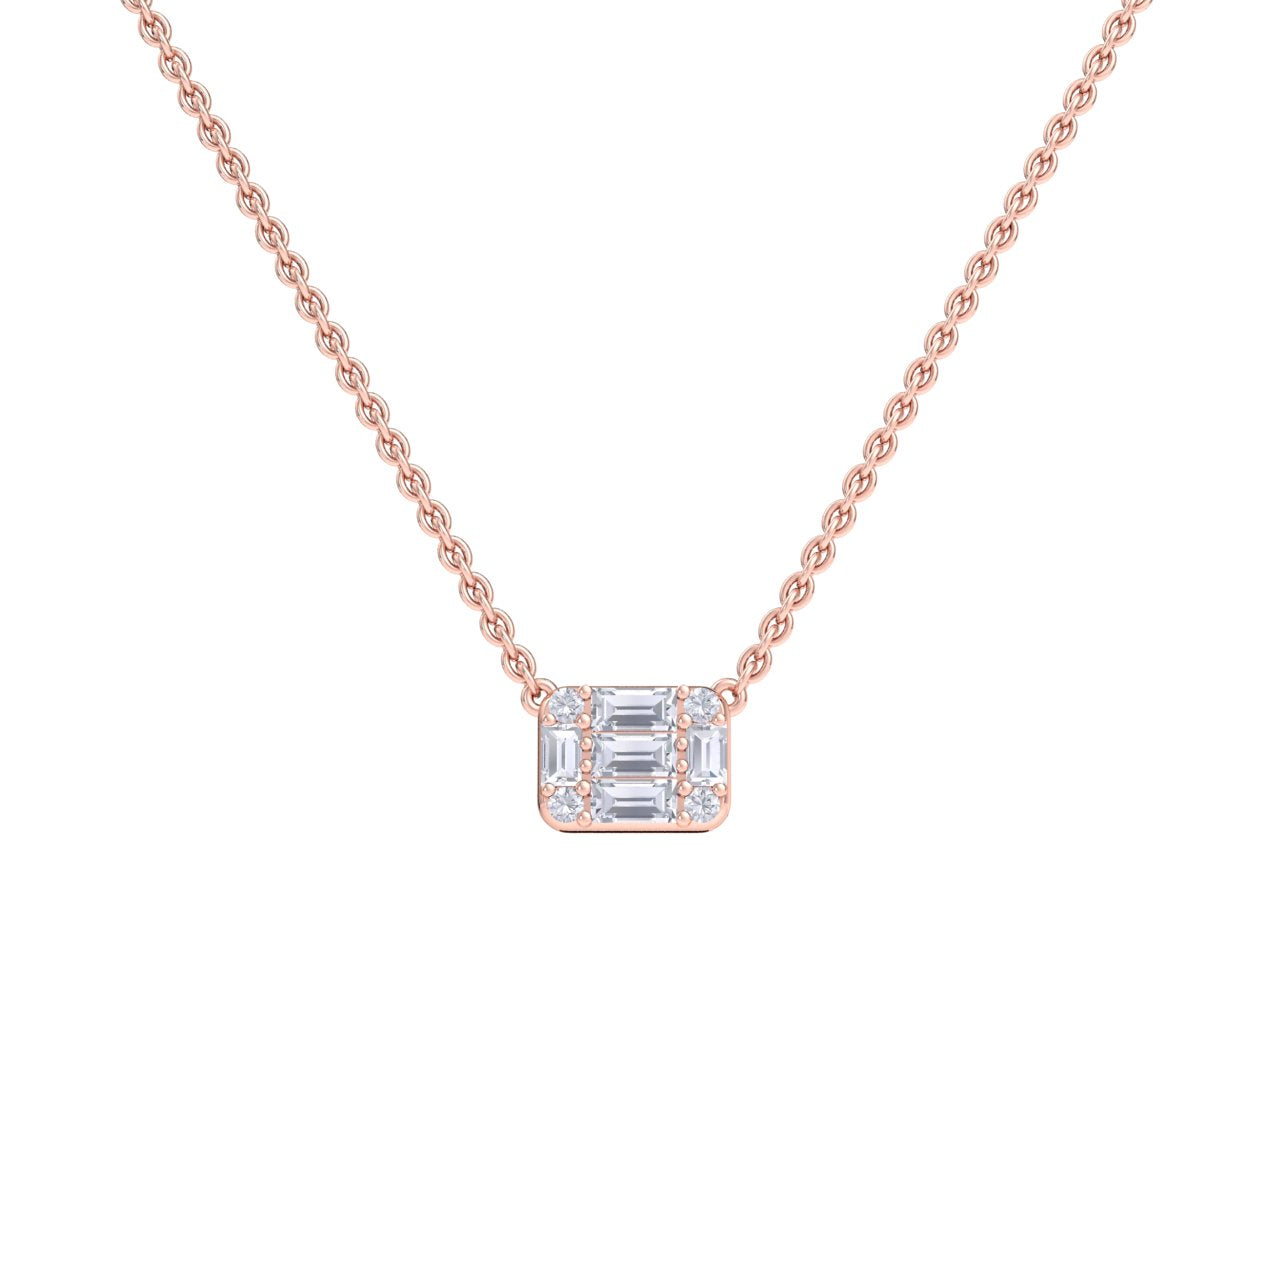 Baguette necklace in yellow gold with white diamonds of 0.57 ct in weight